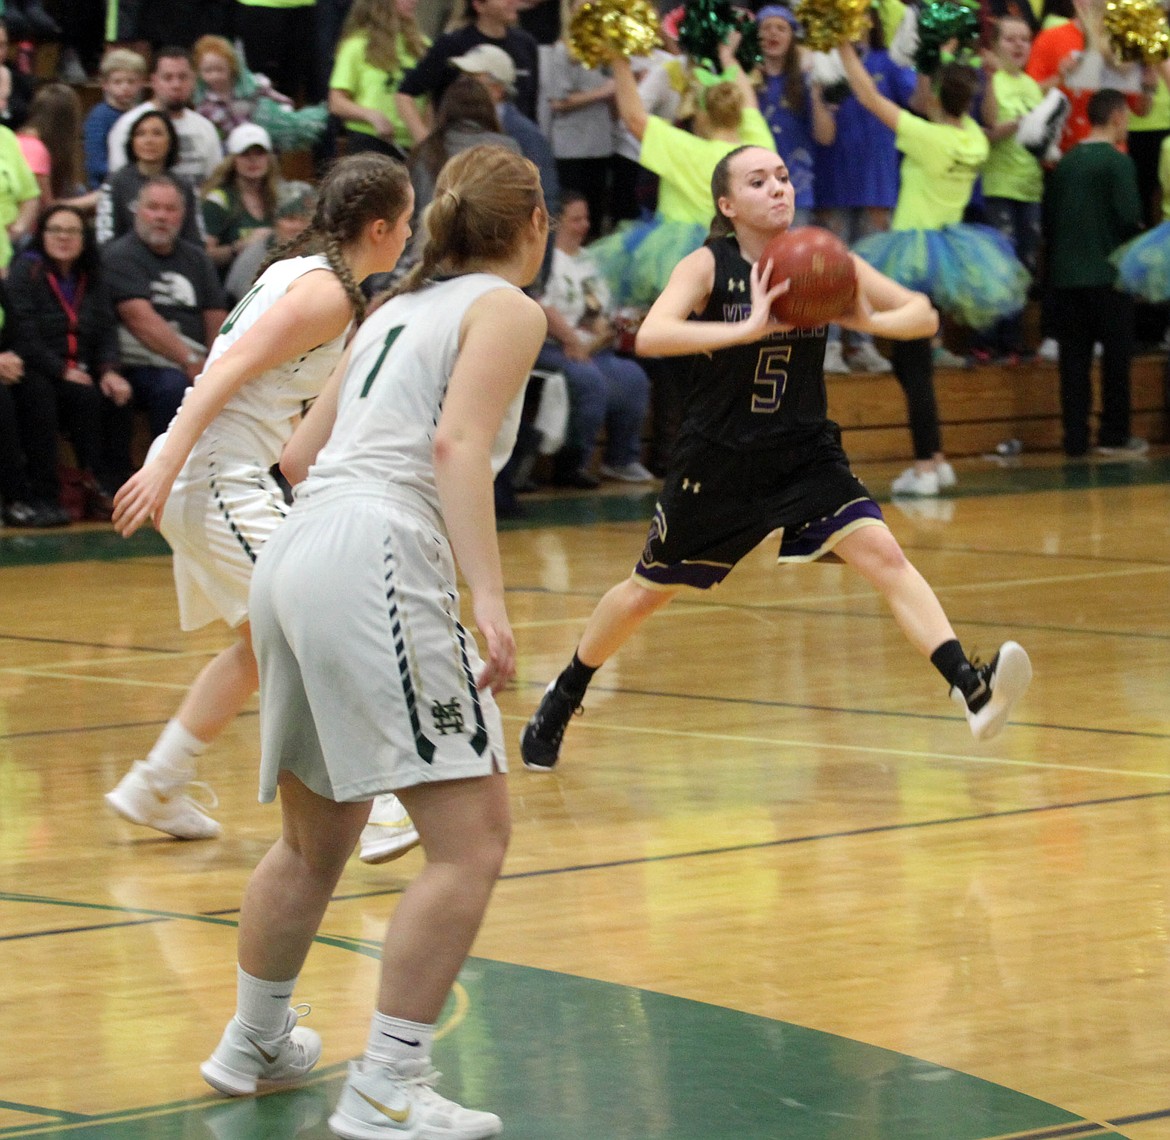 Rylee Riekena fires a pass during Brawl for the Ball.